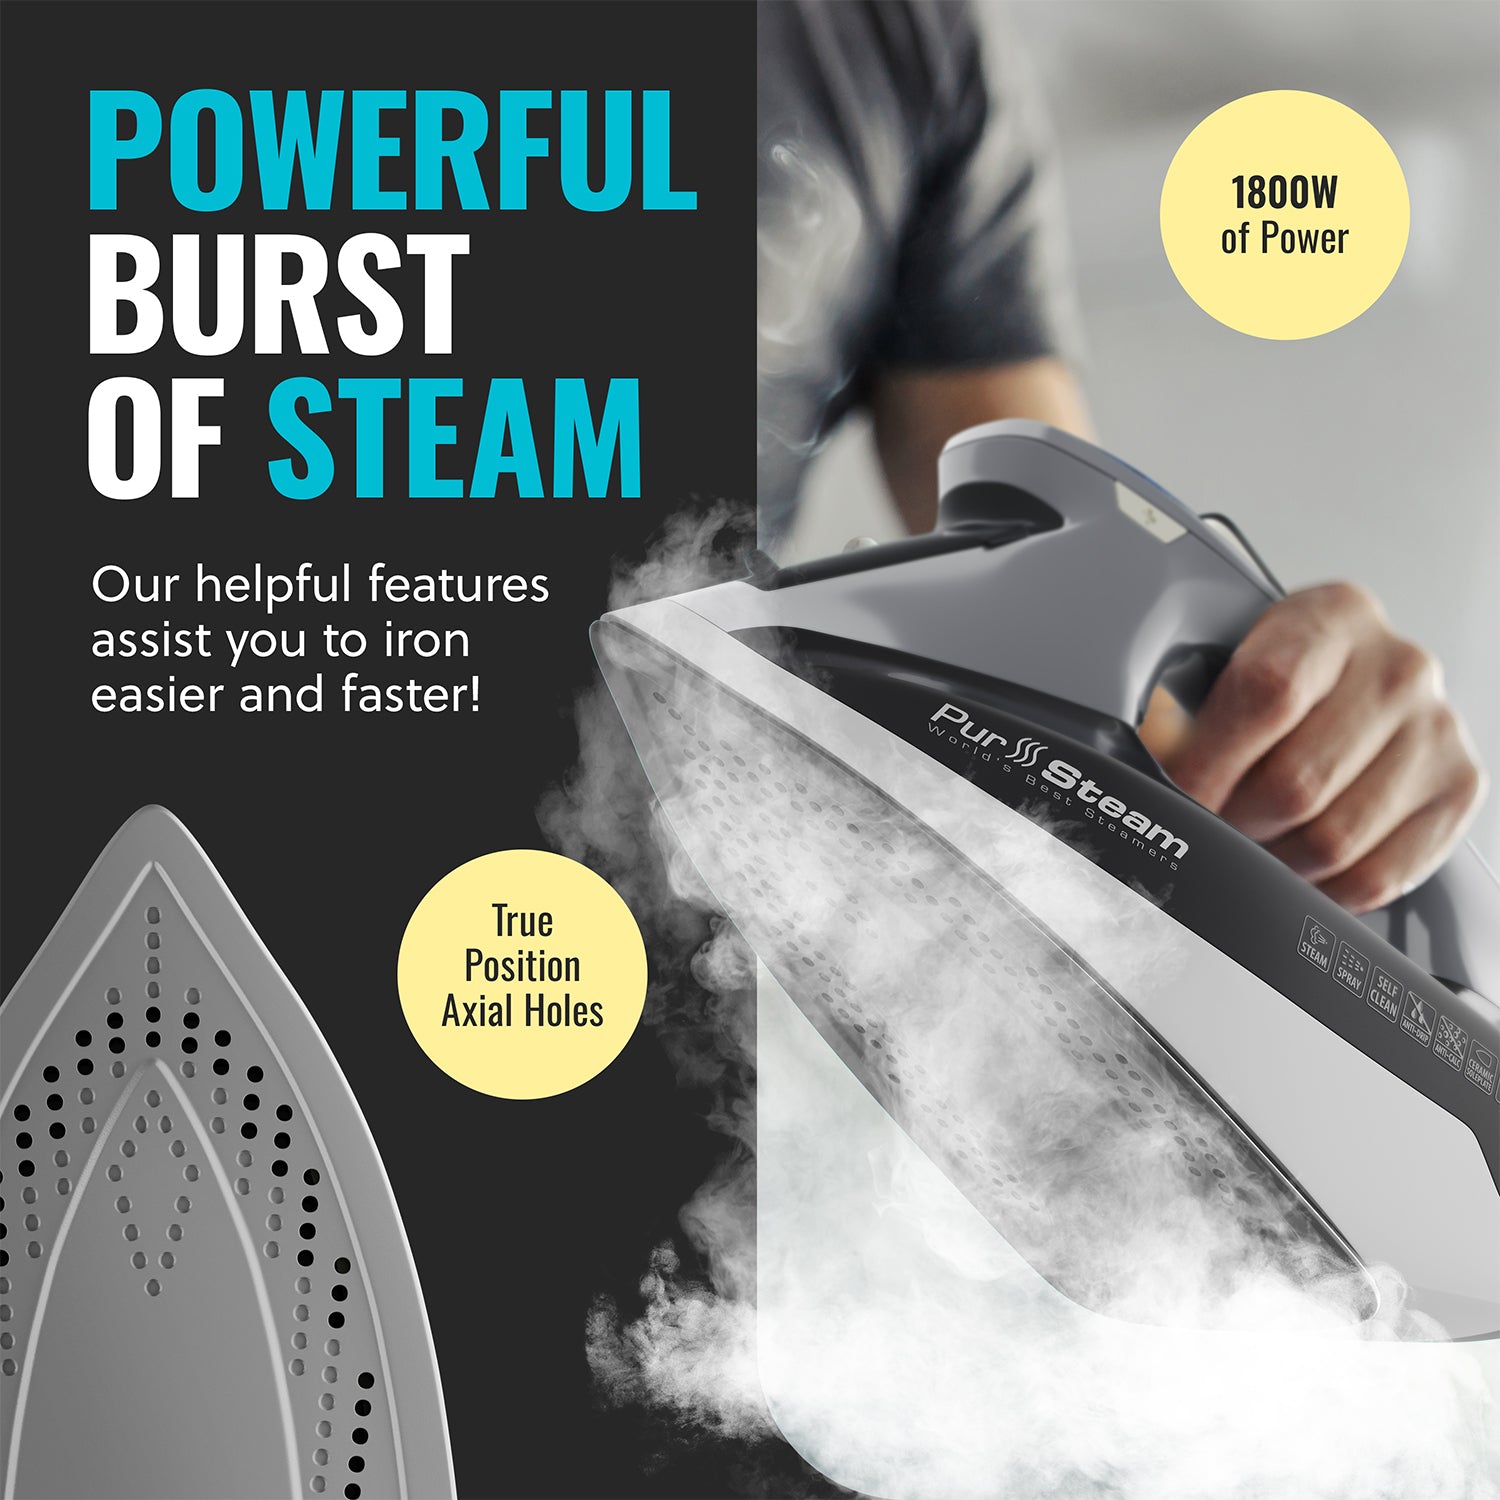 How to Clean an Iron From Soleplate to Steam Holes